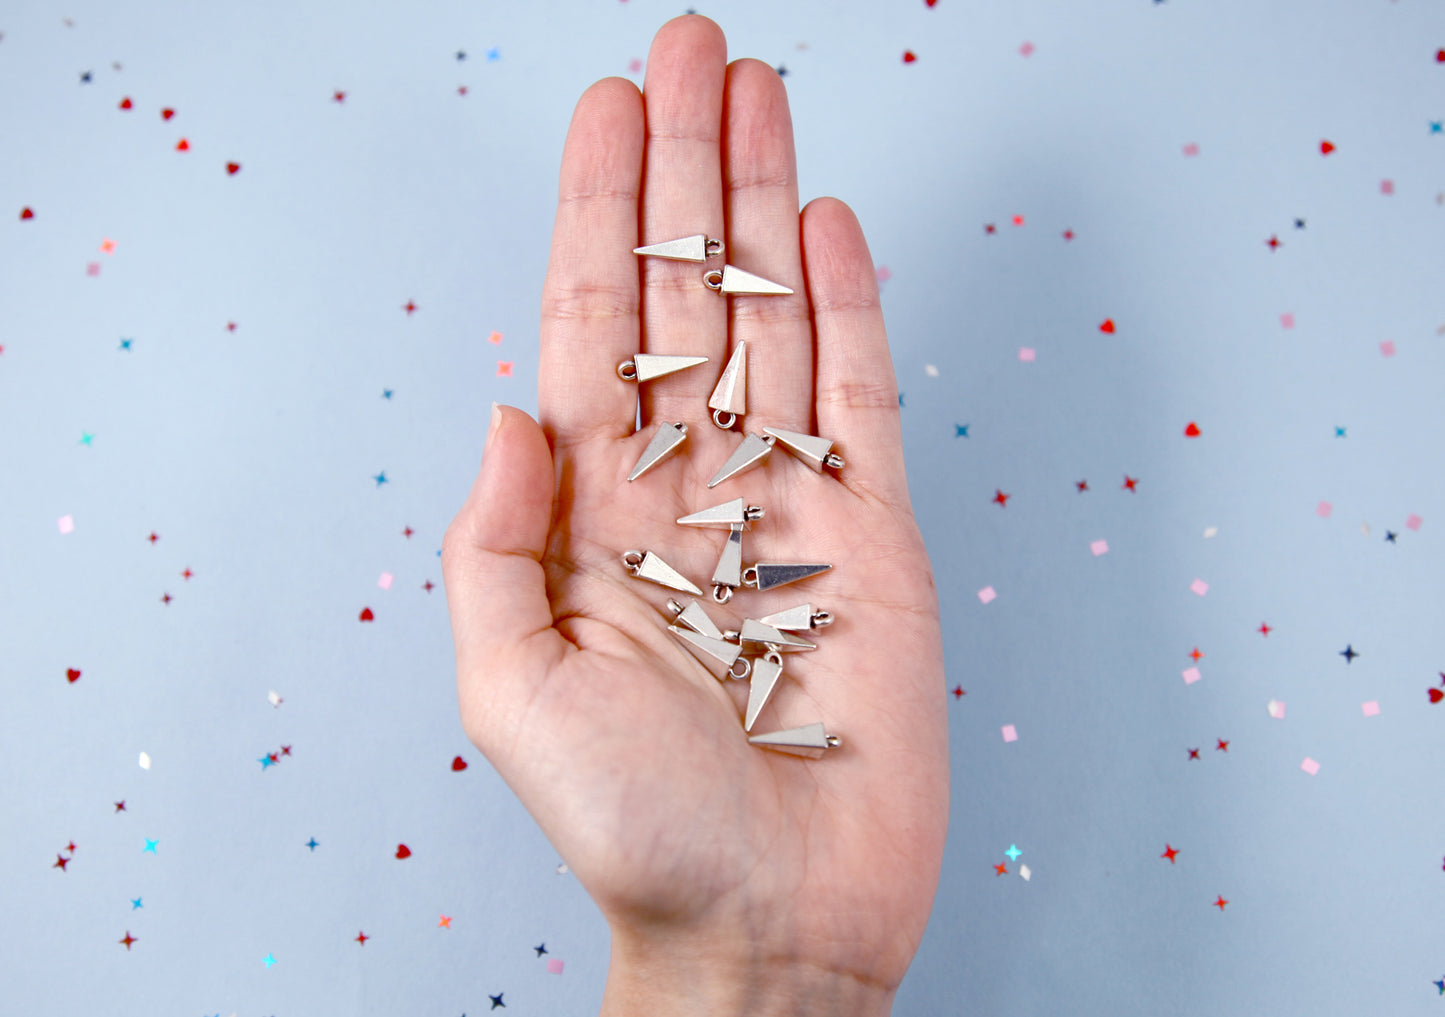 Spike Charms - 20 pc set - 16mm Triangular Spiky Charm - Silver Color - With Holes to Easily make Jewelry